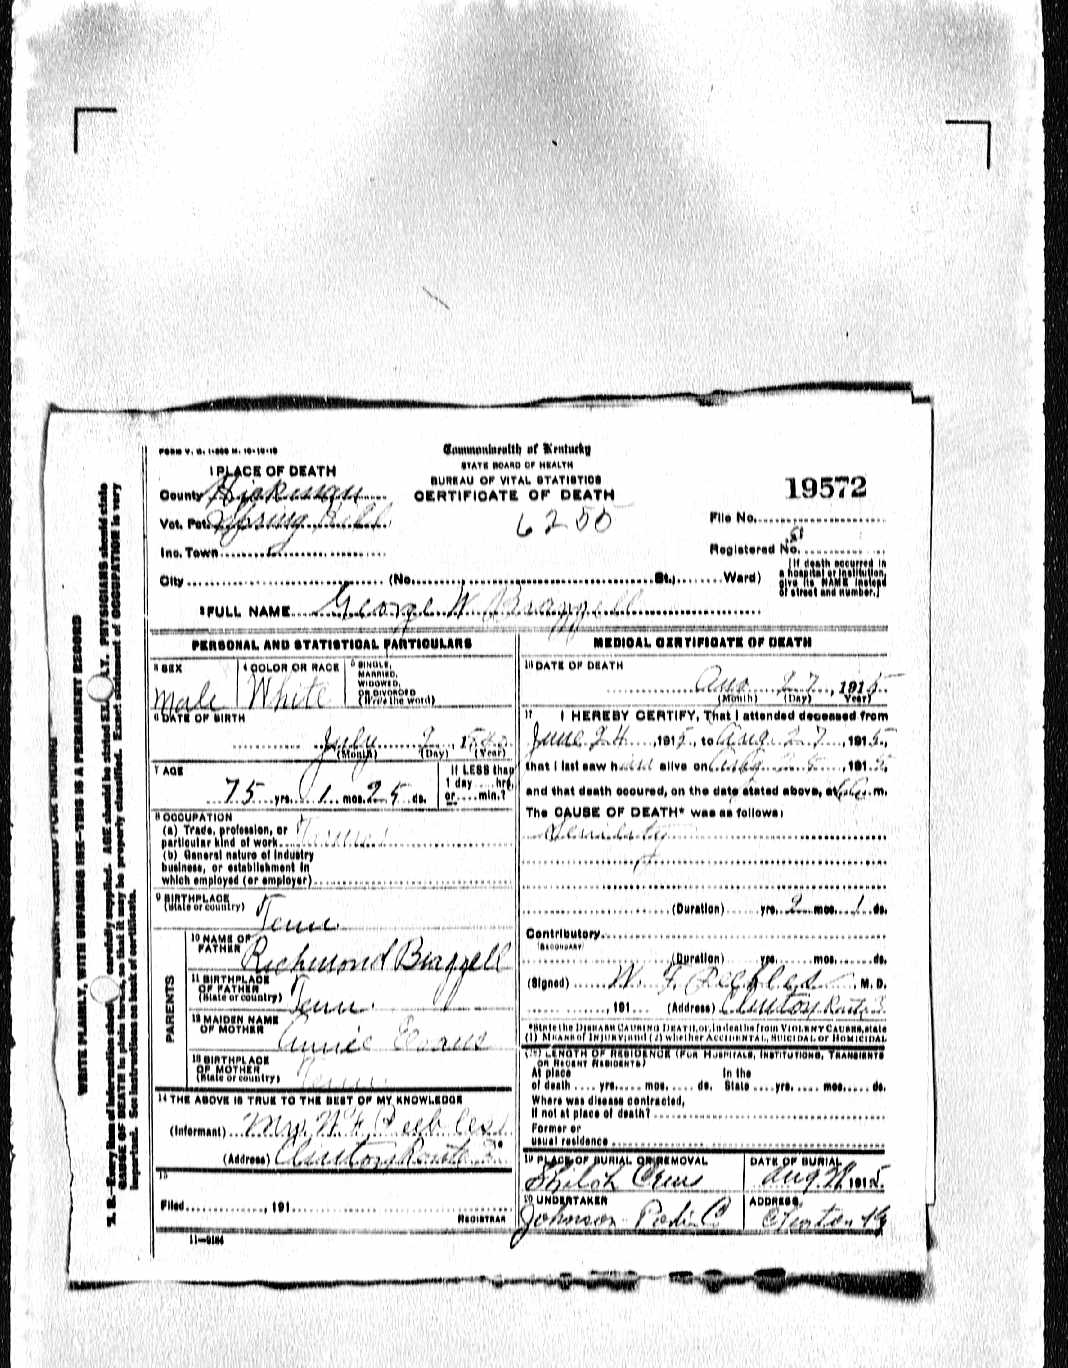 George W. Brazzell (son of Ricmond Brazzell and Annice Evans), death certificate, 1915, Hickman County, Kentucky.